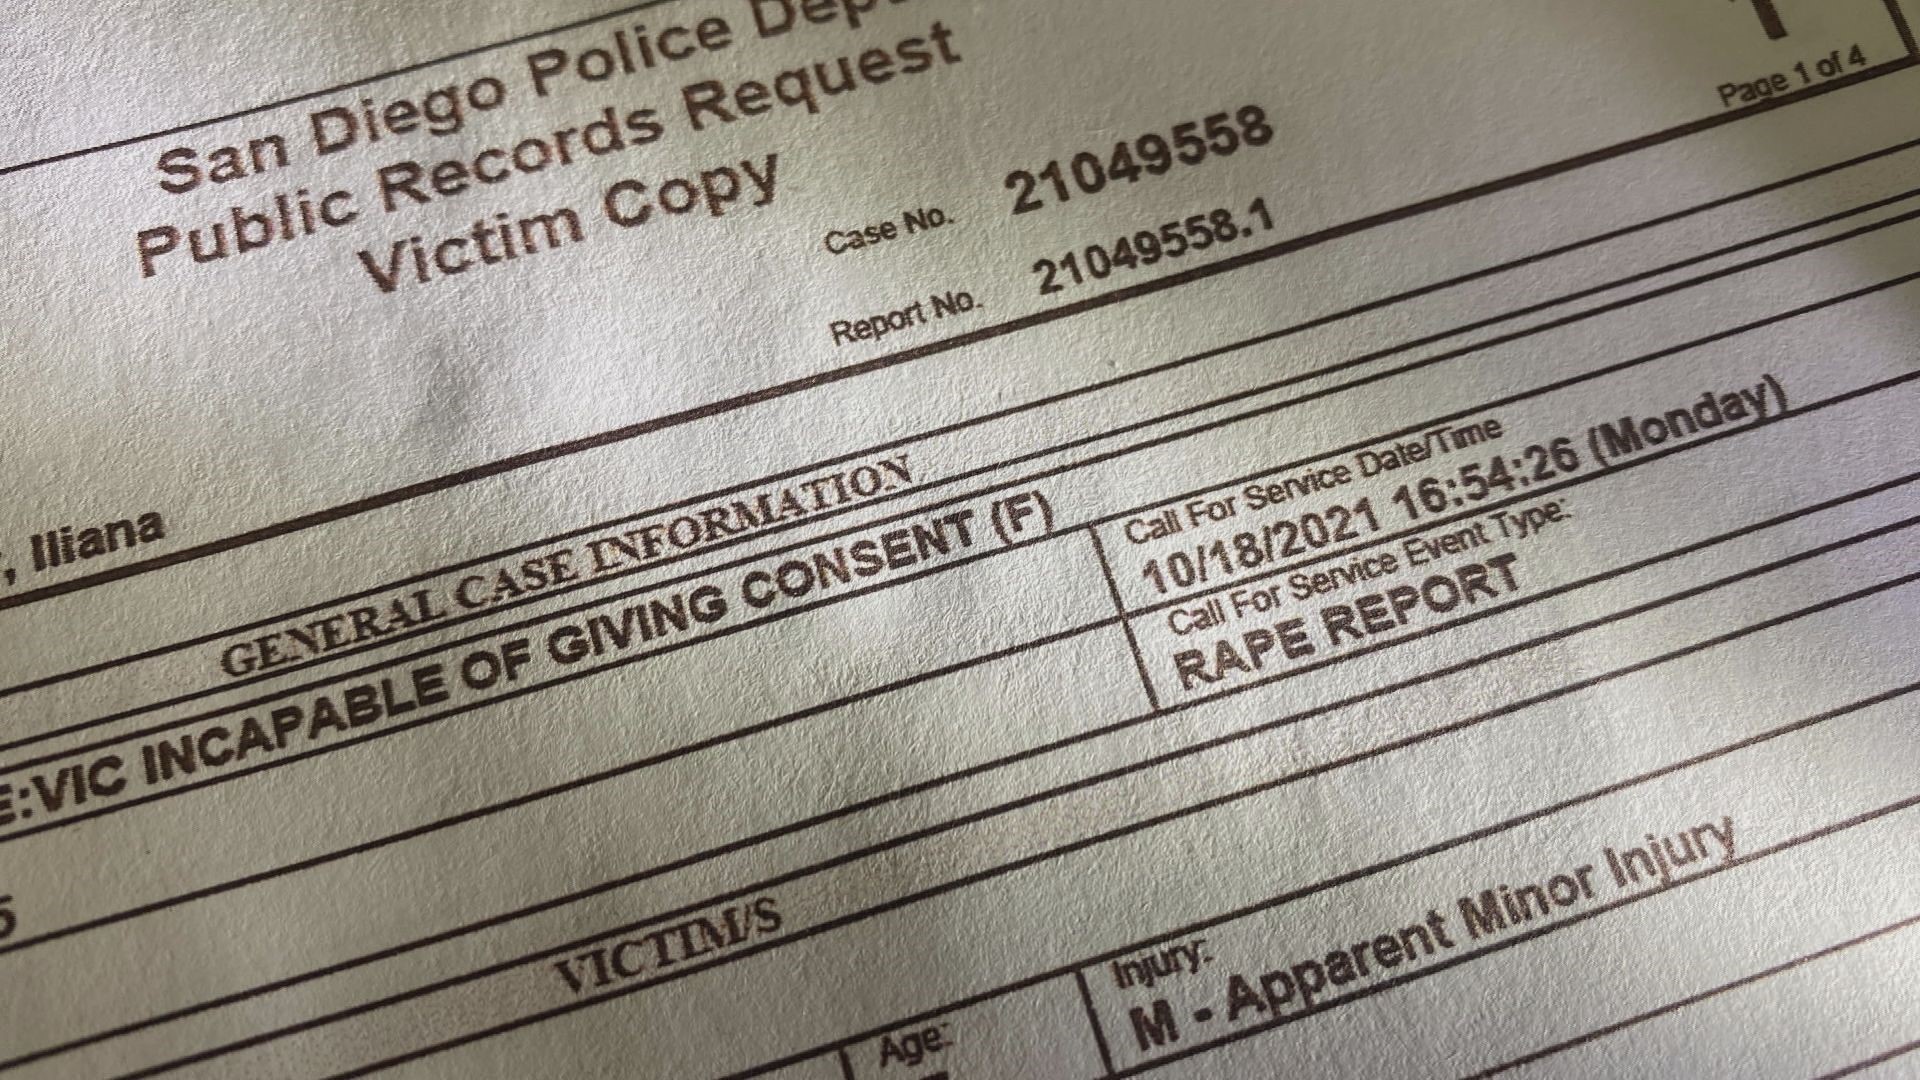 The San Diego Police Department released a report showing multiple 'assailants' had sex with the alleged victim.